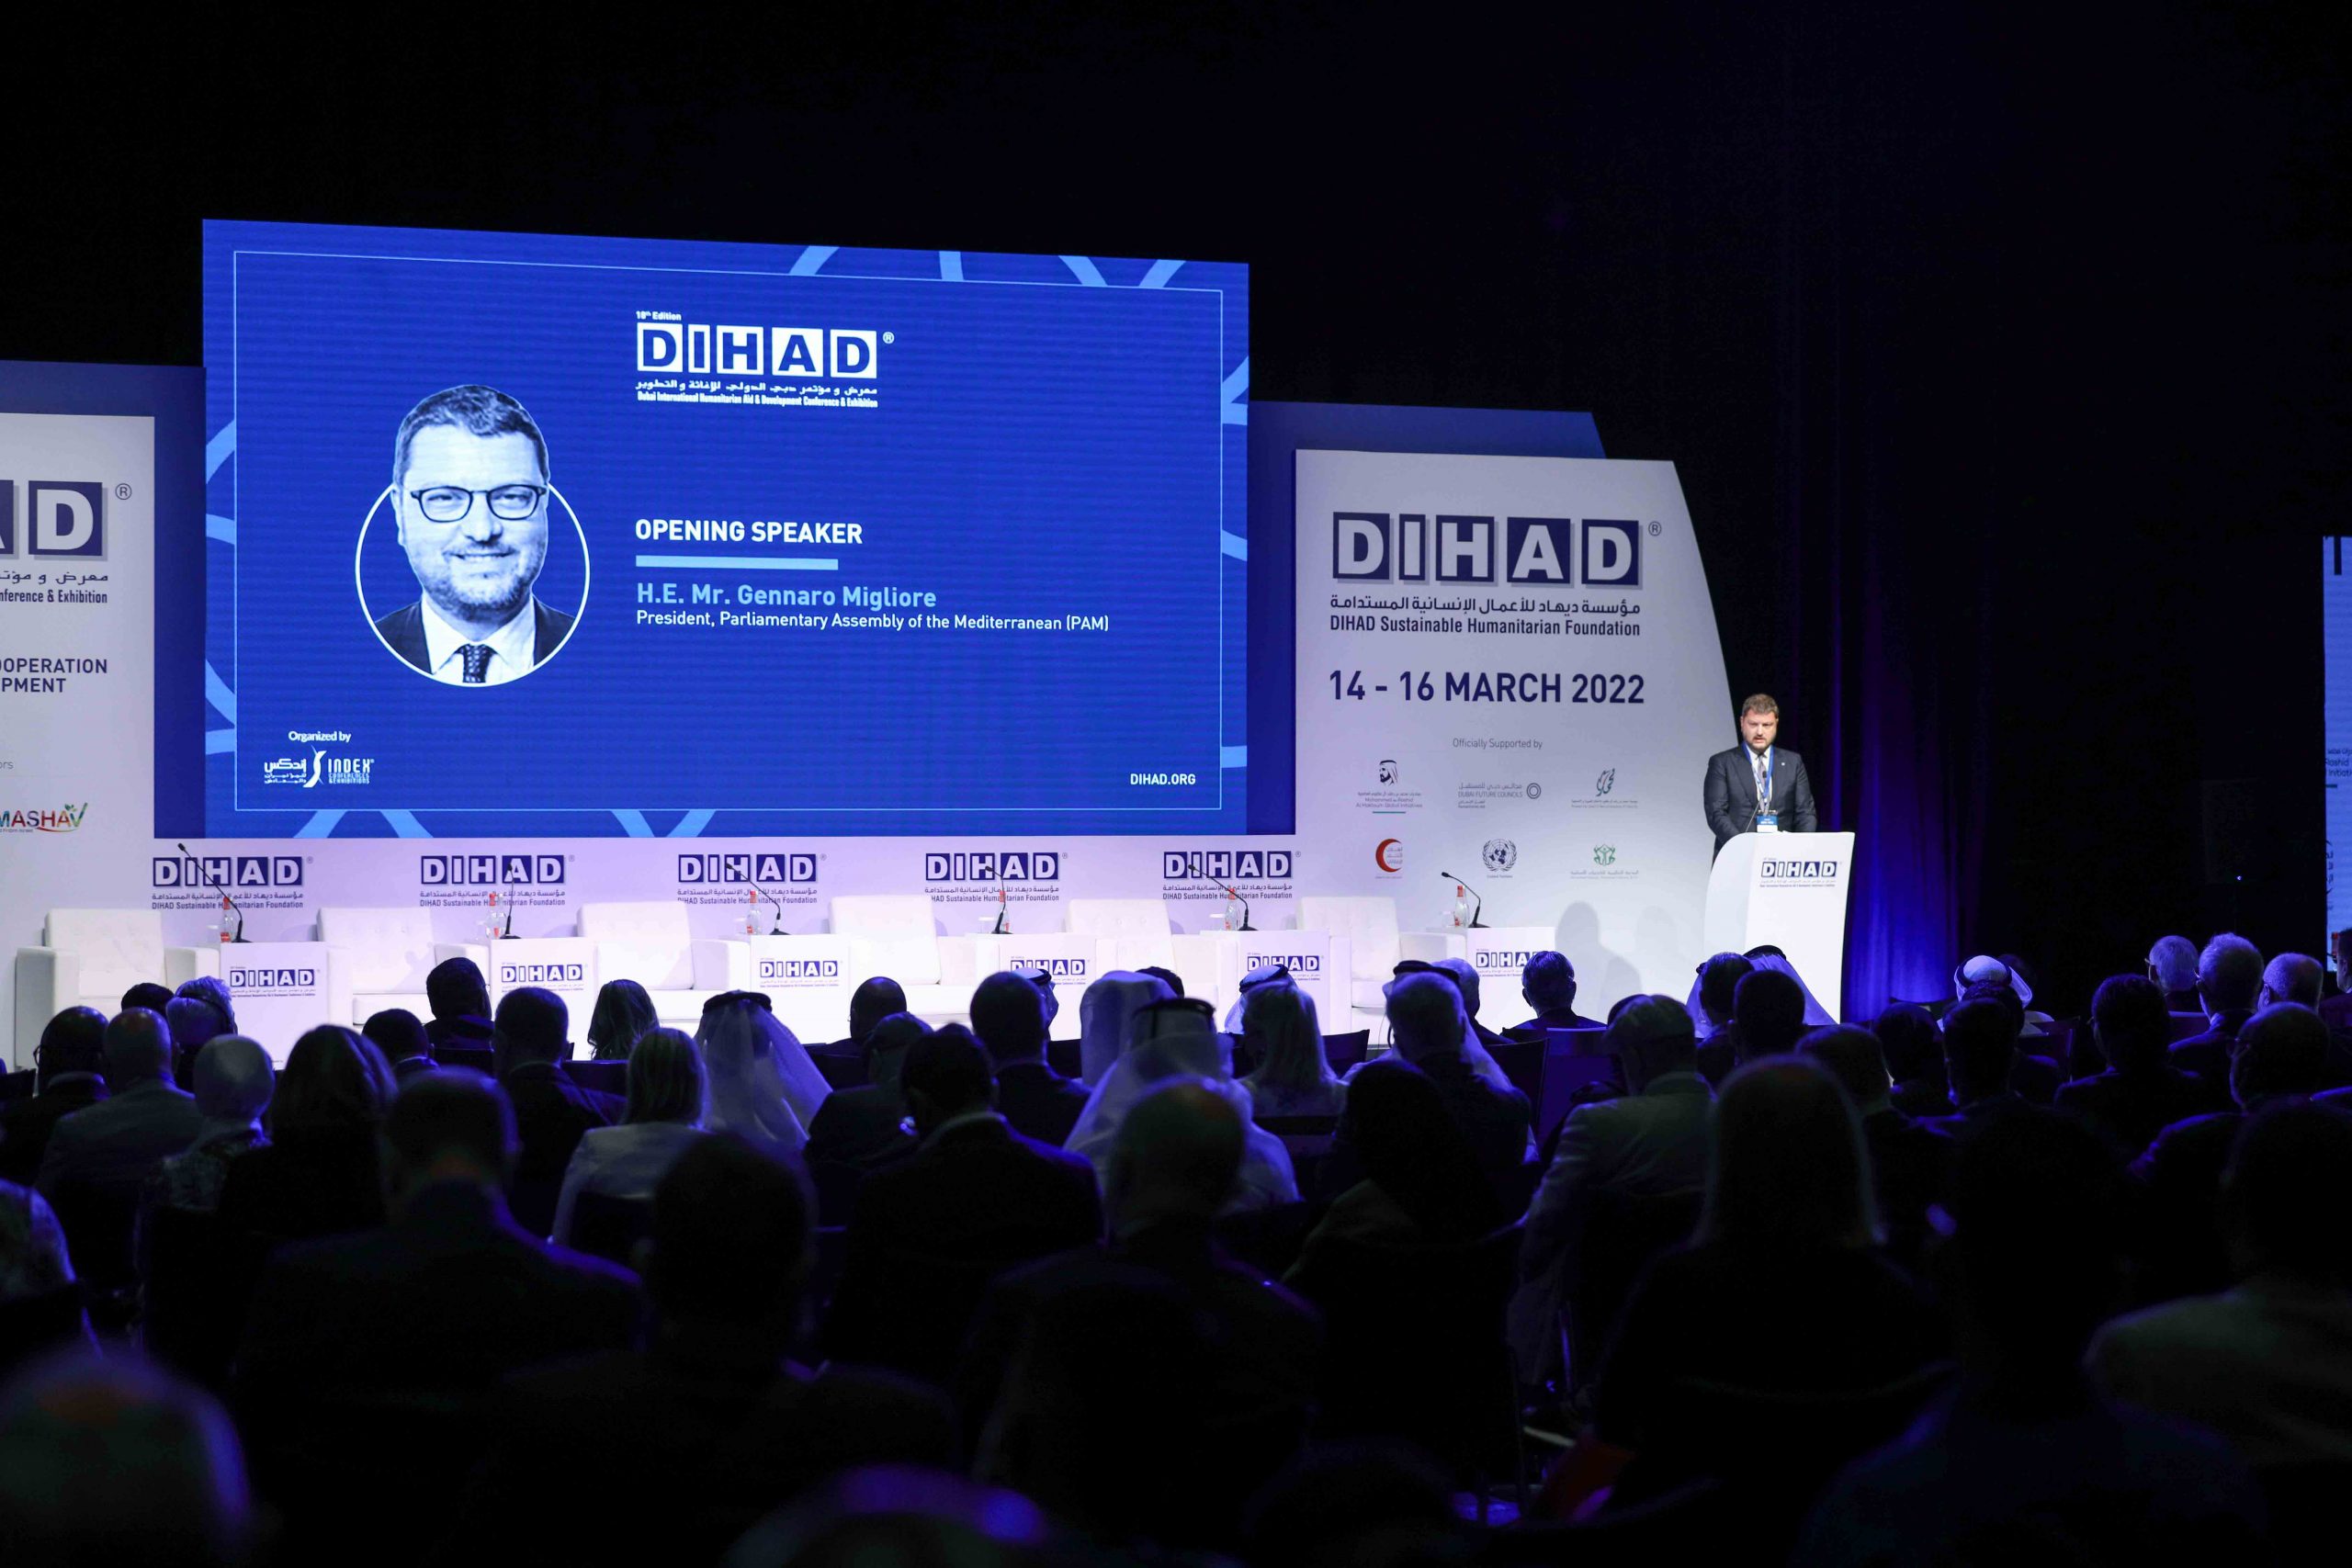 Dubai: DIHAD Aid Conference and Show returns on March 14